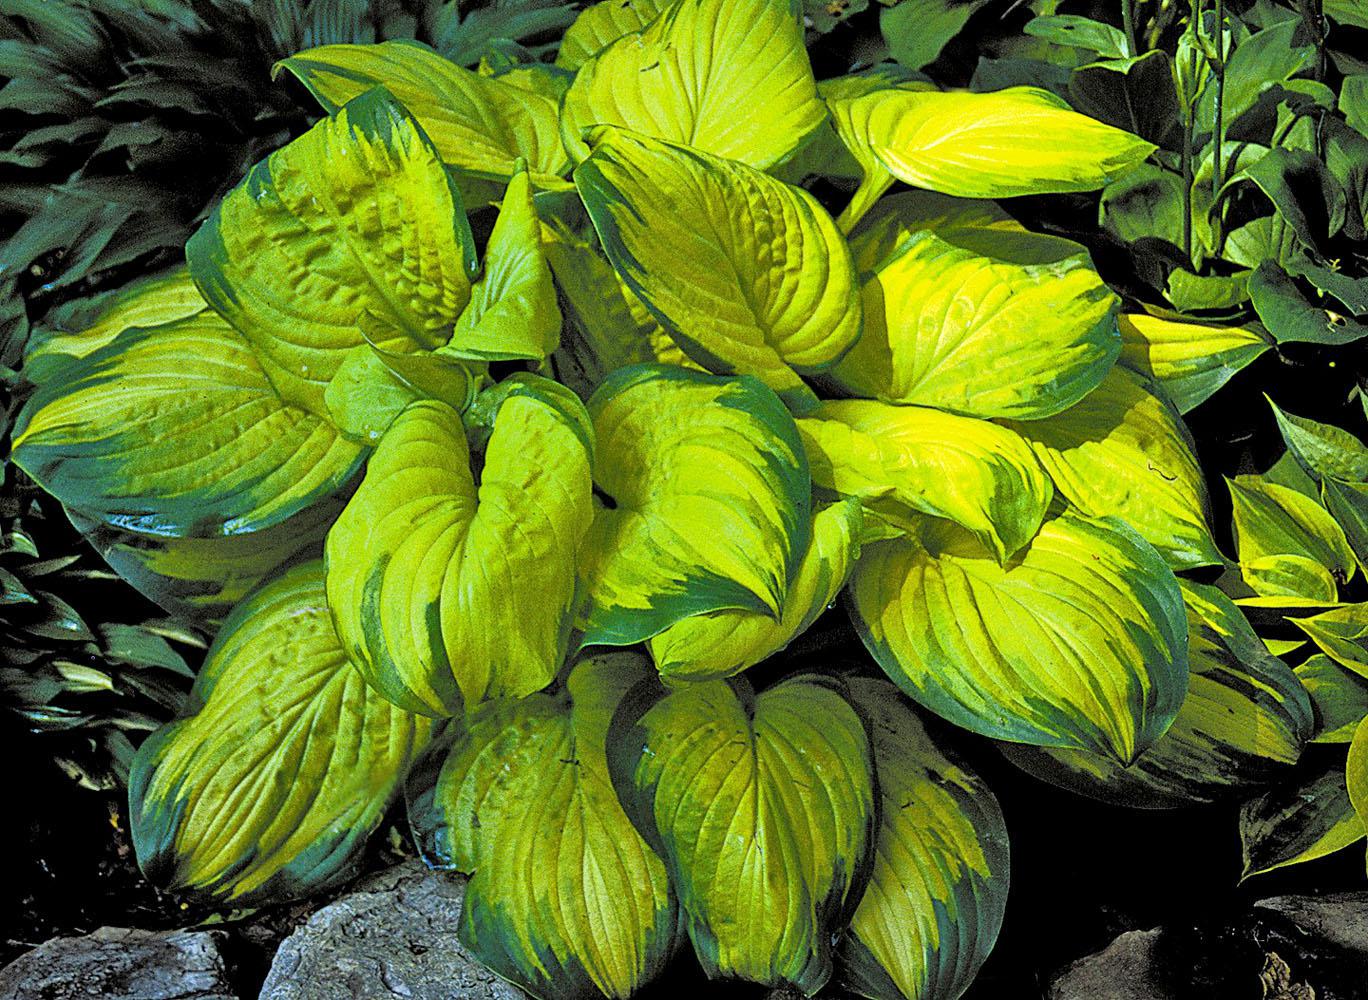 Stained Glass has brilliant shiny golden foliage surrounded by a 2-inch wide, dark-green margin. The American Hosta Growers Association has chosen Stained Glass as the 2006 "Hosta of the Year."